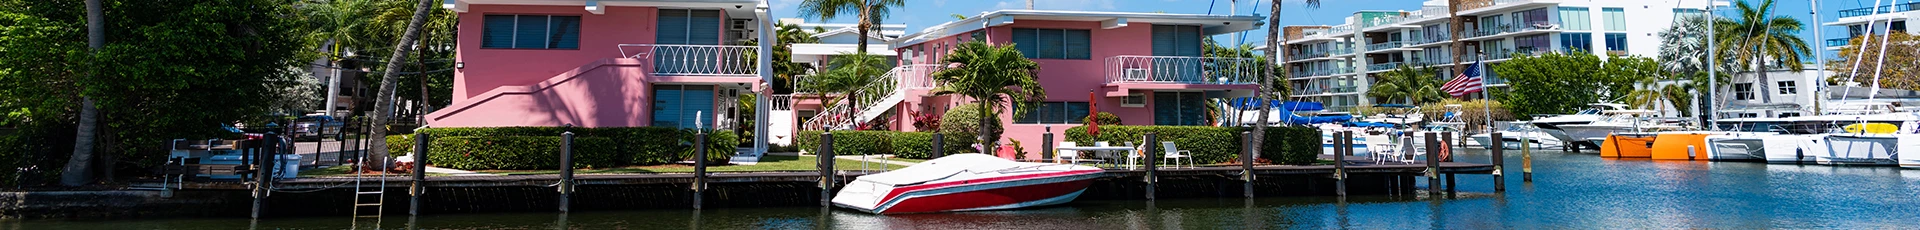 Boat Removal, Dismantle and Disposal in Bushnell Florida